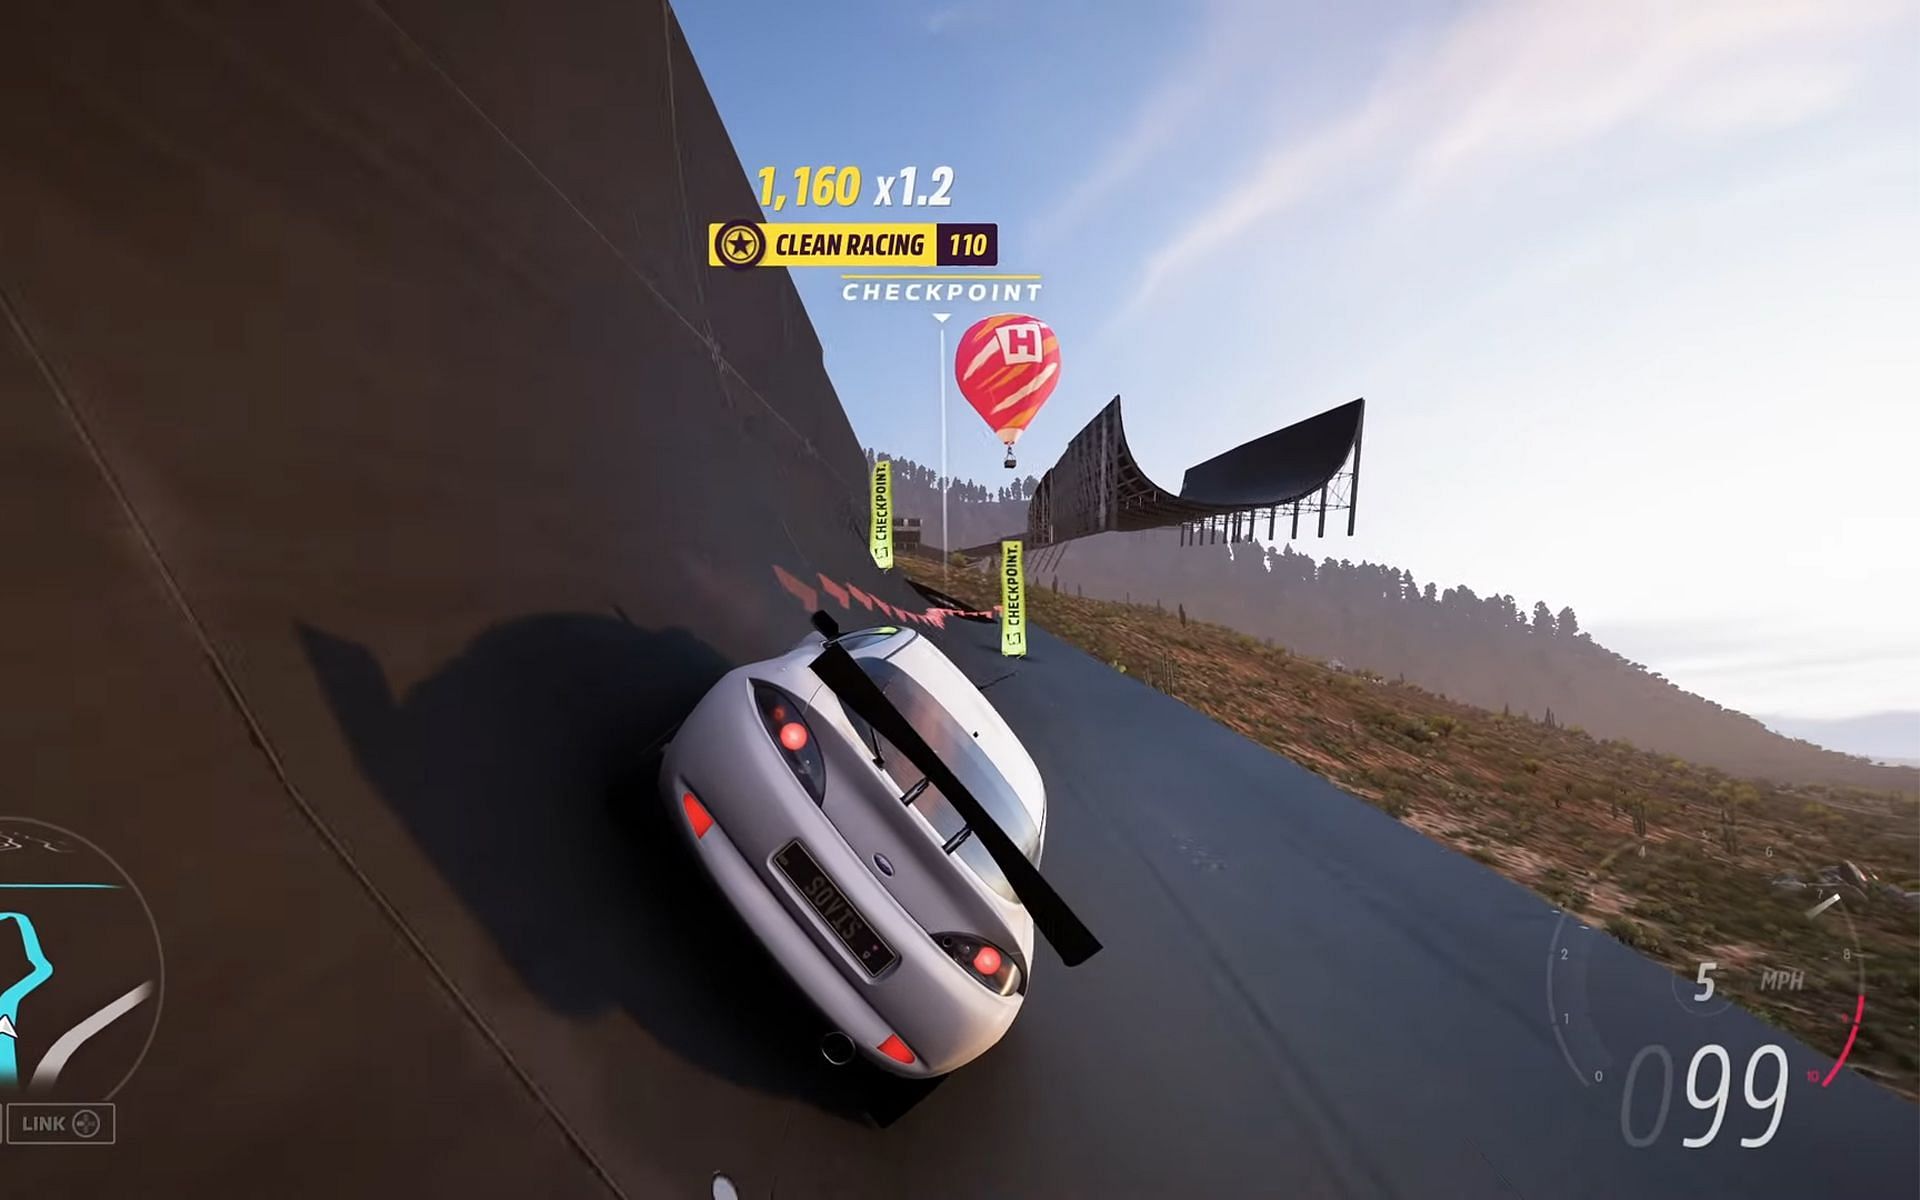 Forza Horizon 5 Event Lab Allows You to Create (Almost) Anything You Can  Imagine – GTPlanet